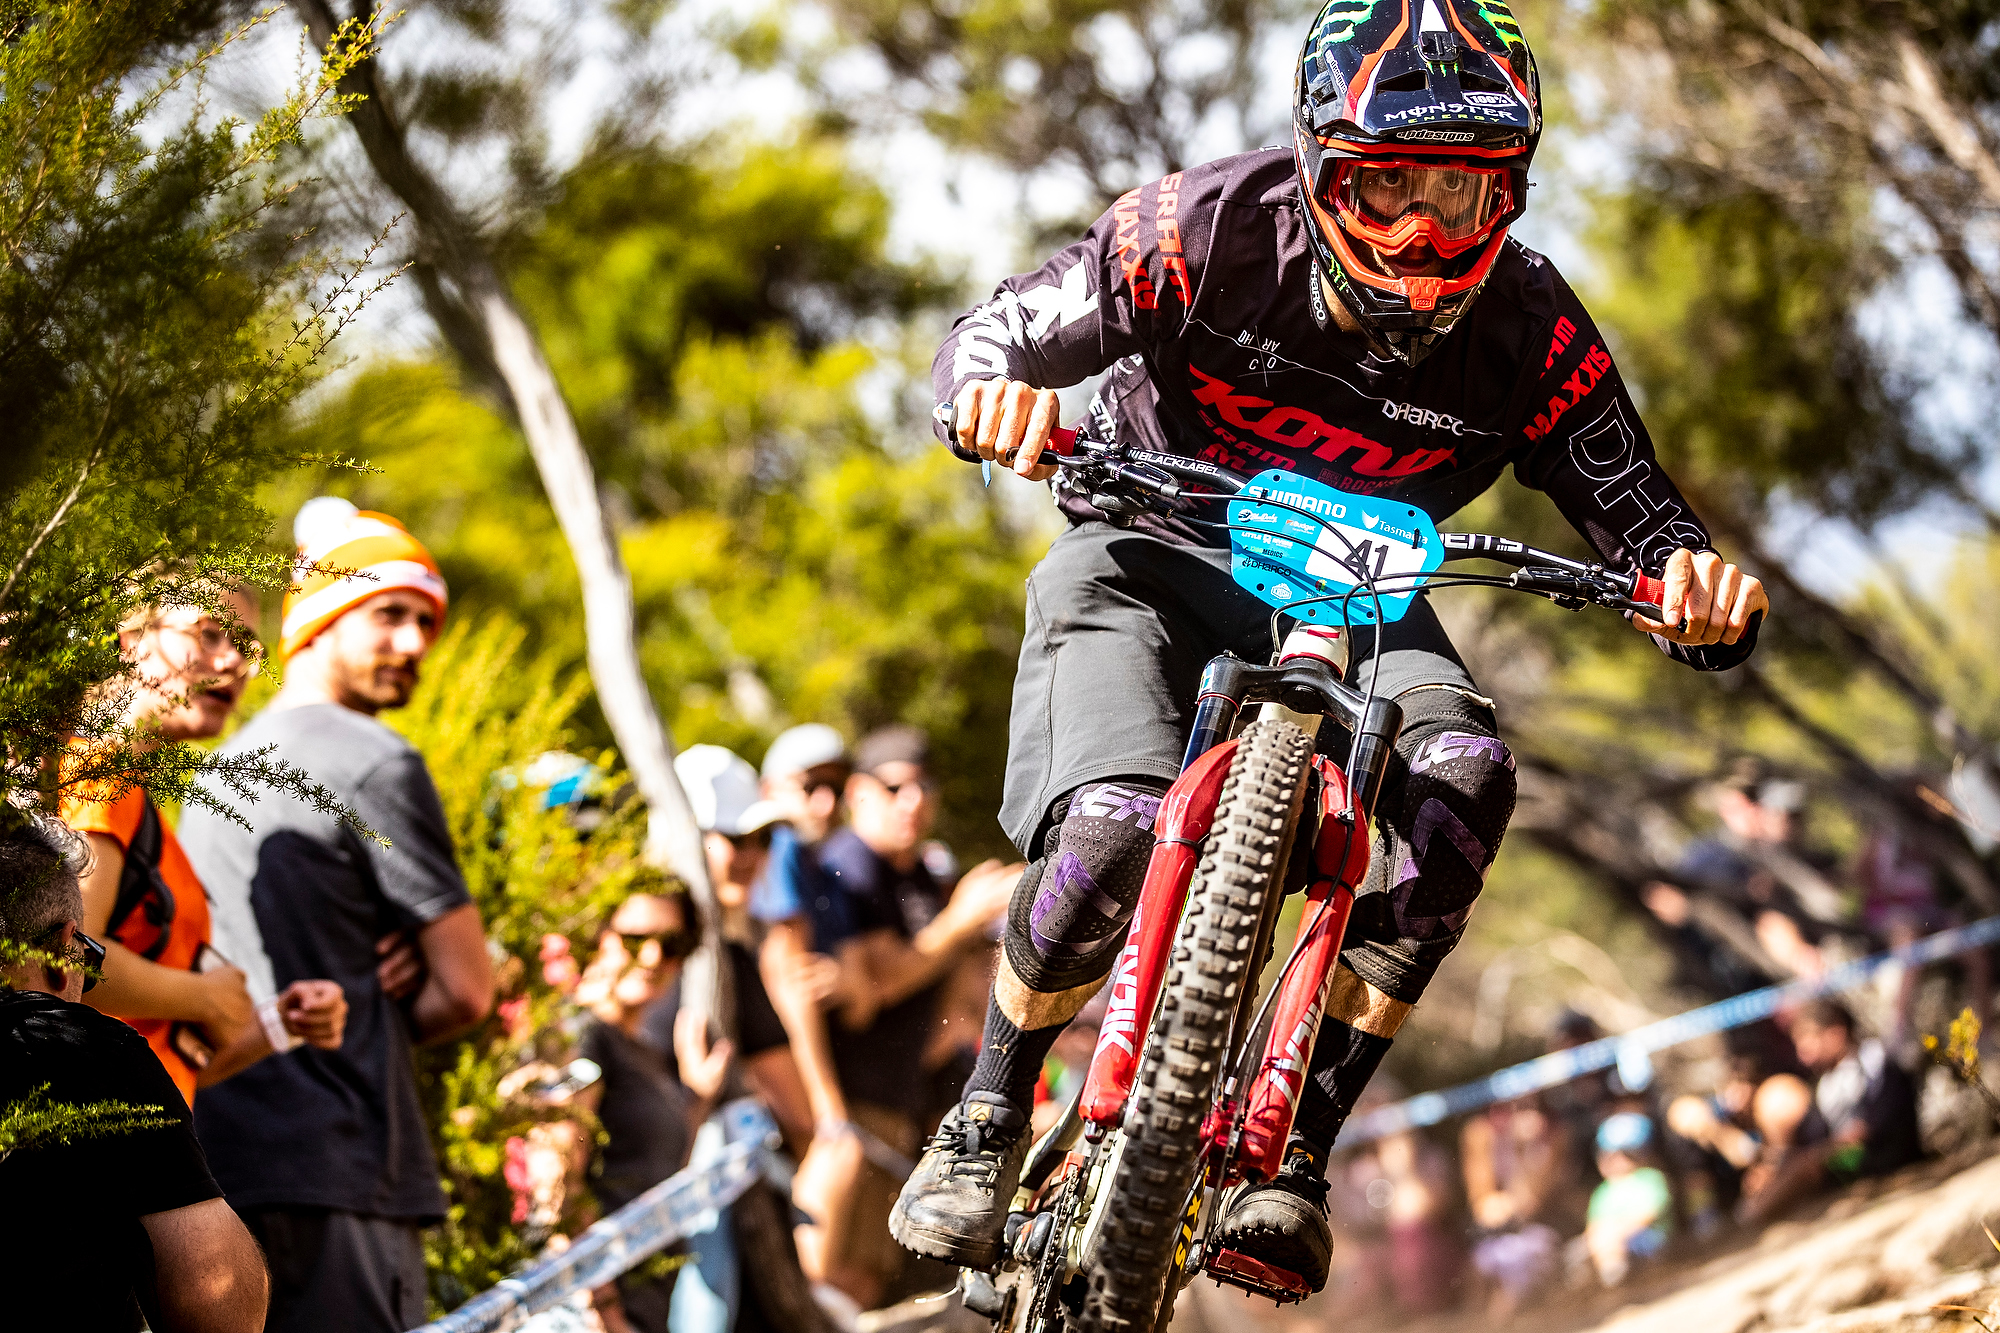 Connor Fearon Finishes in Third Place at Round Two of the EWS in Tasmania